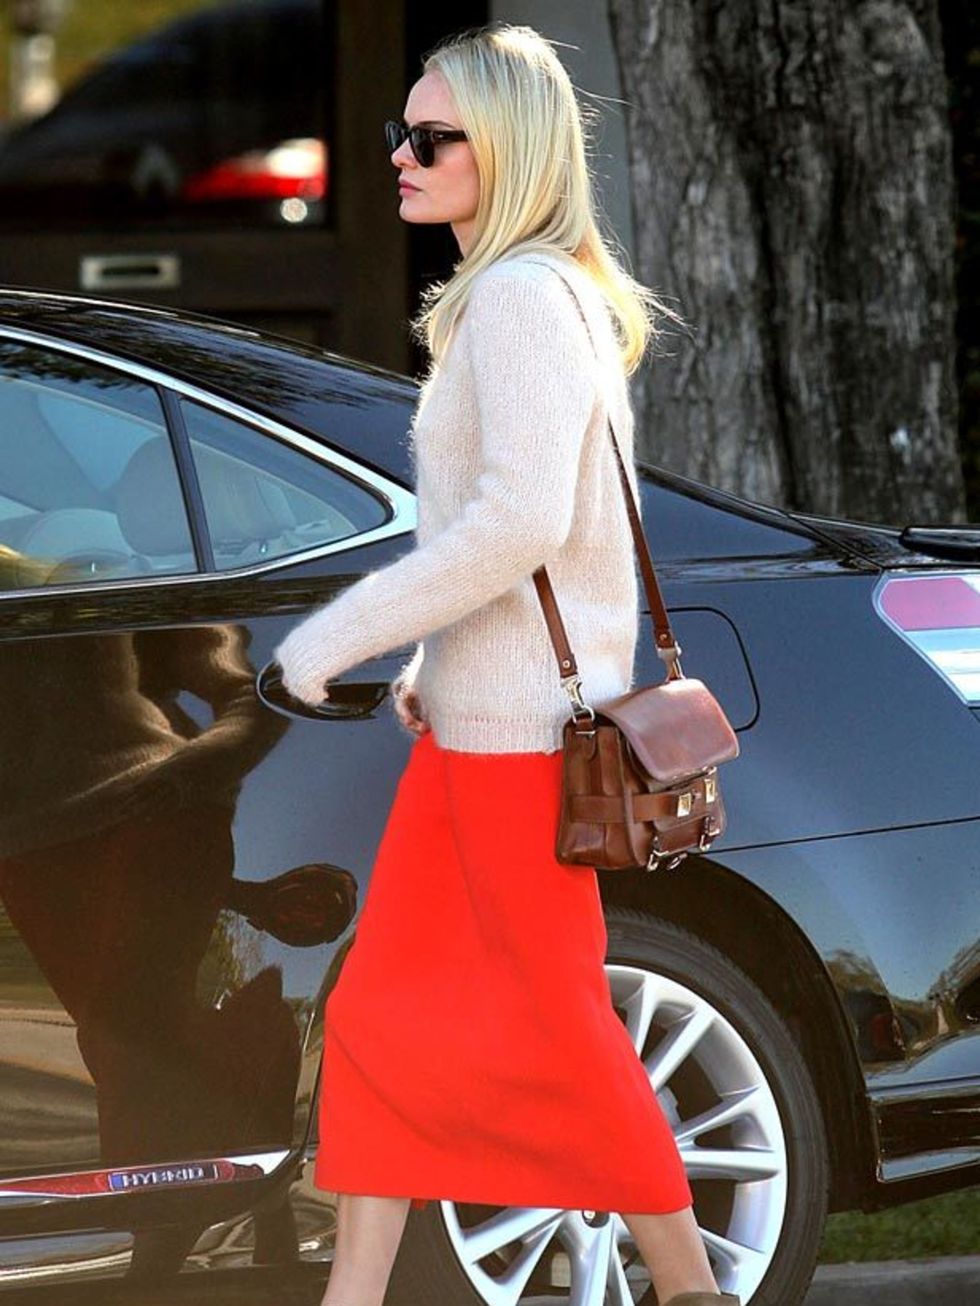 <p><a href="http://www.elleuk.com/starstyle/style-files/%28section%29/kate-bosworth/%28offset%29/0/%28img%29/462392">Kate Bosworth</a> teaming her red skirt with a <a href="http://www.elleuk.com/catwalk/collections/proenza-schouler/">Proenza Schouler</a> 